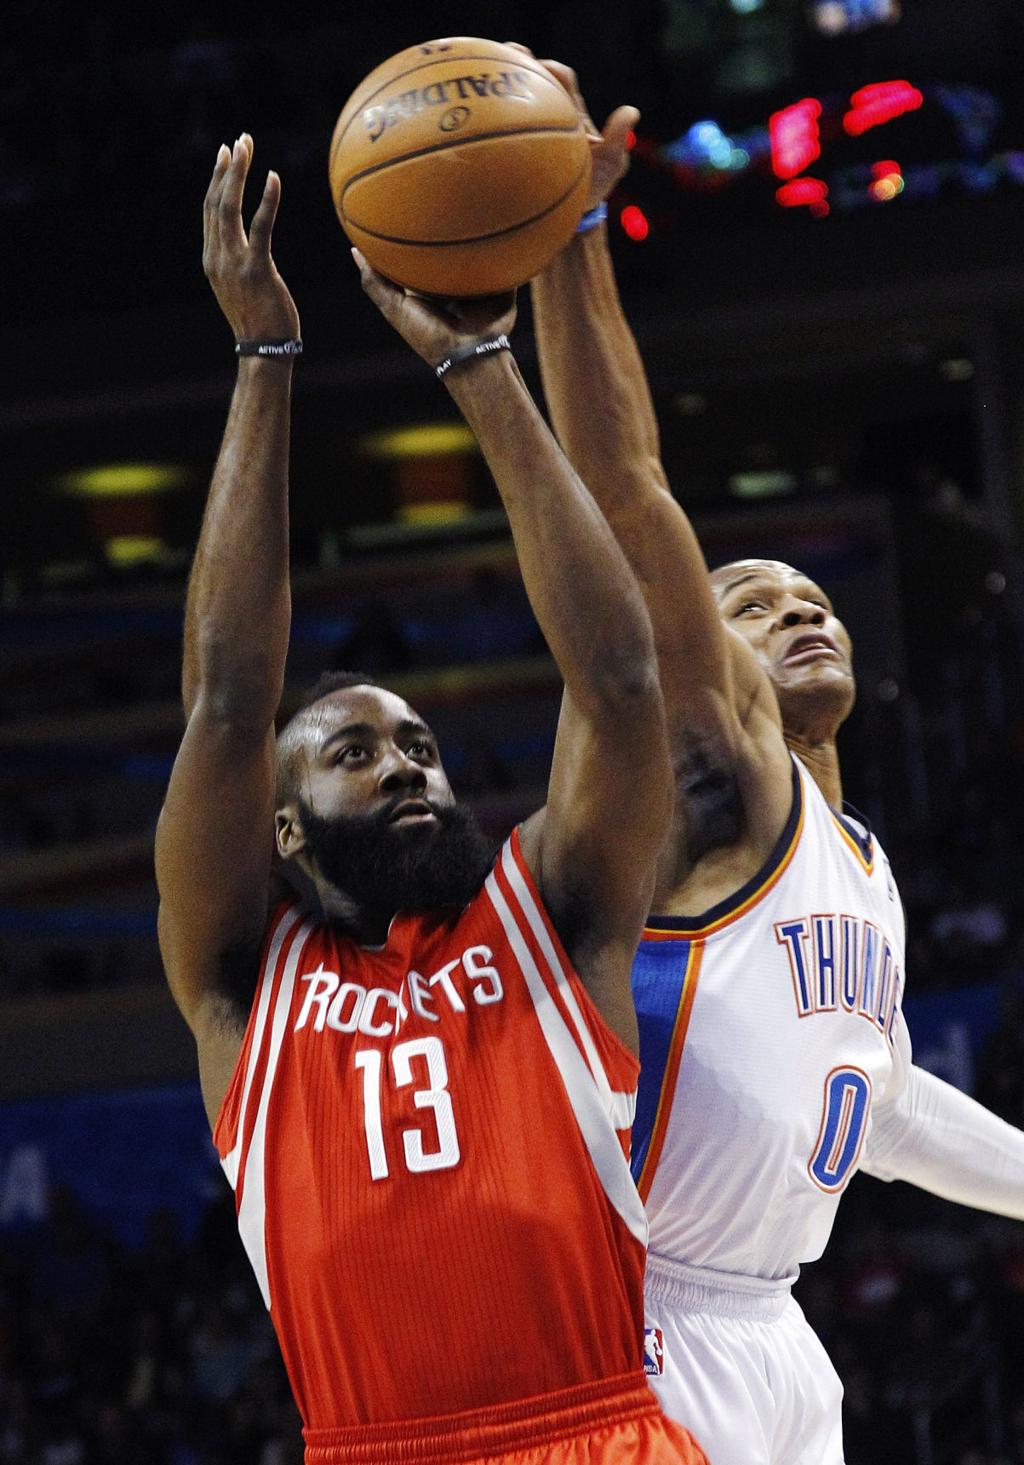 For Oklahoma City, Why Serge Ibaka Matters More Than James Harden